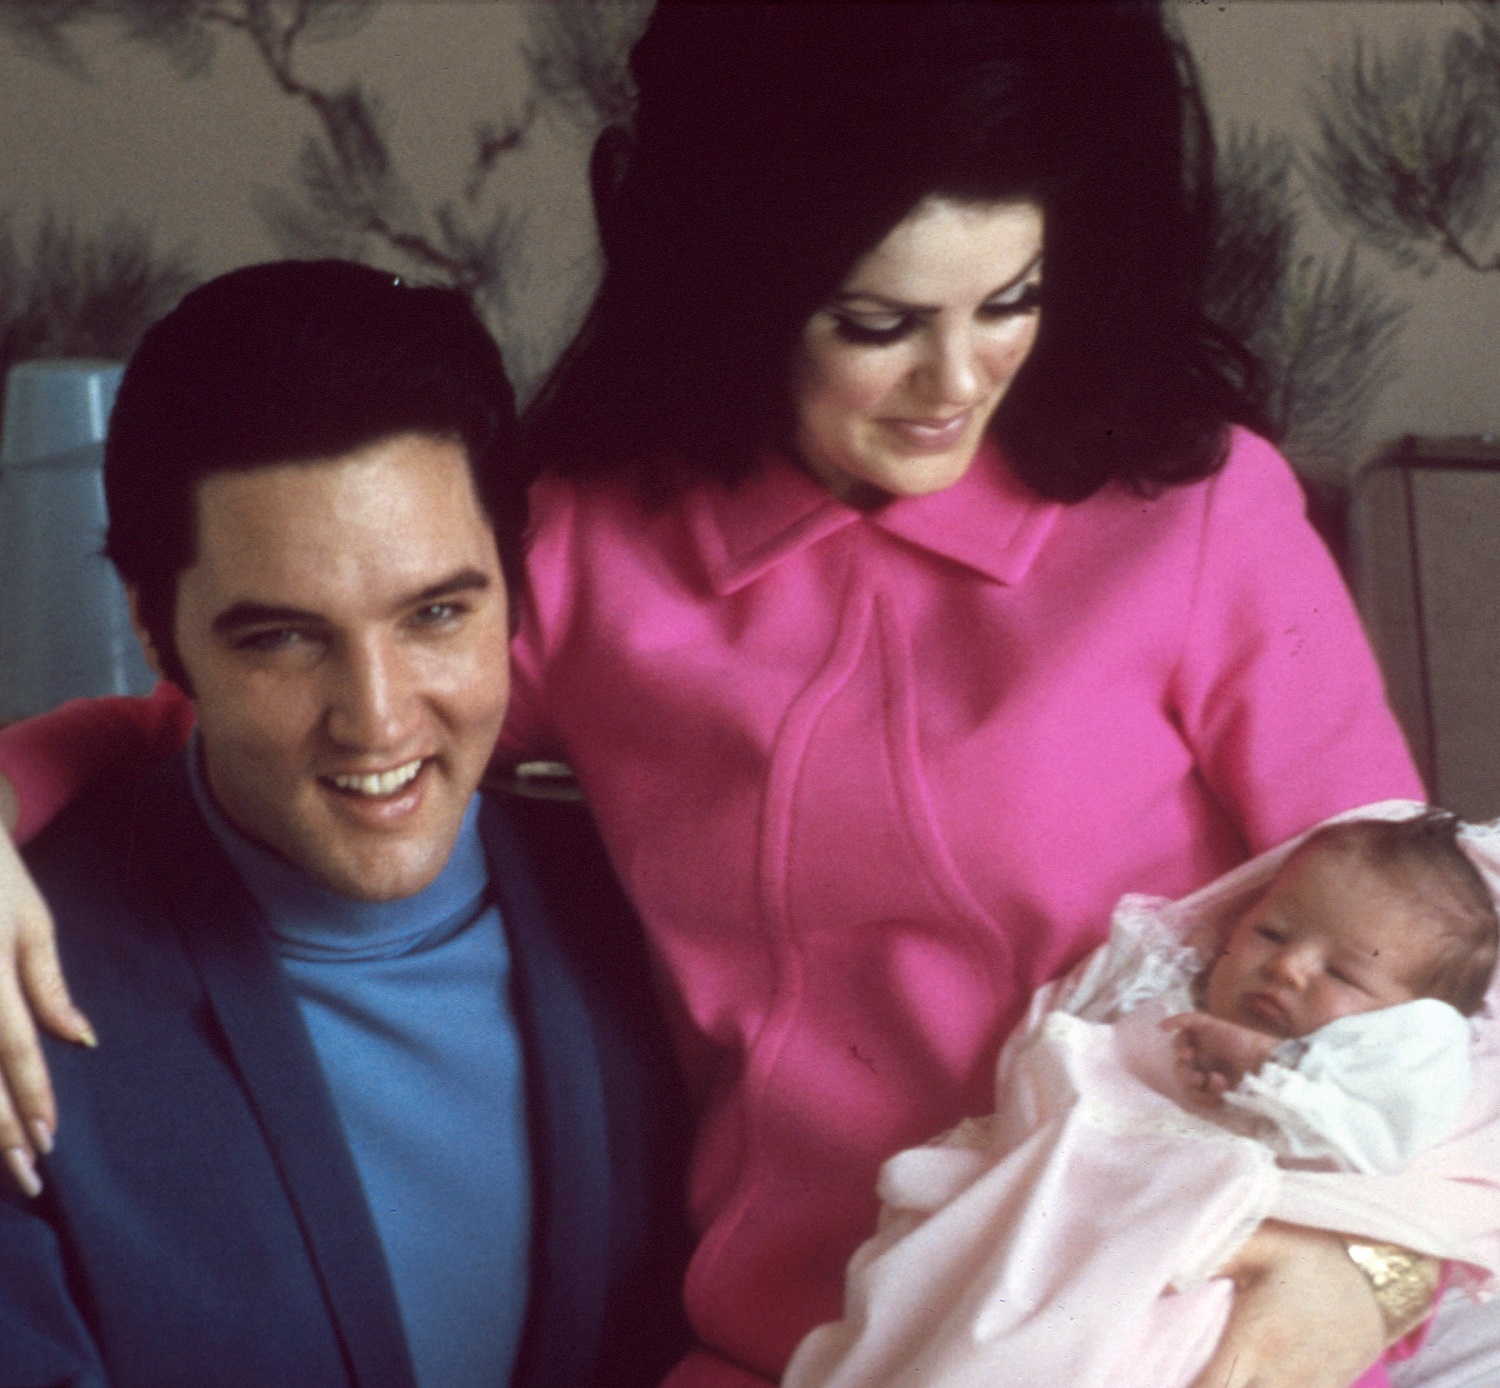 Elvis Presley with his wife Priscilla Presley and their 4 day old daughter Lisa Marie Presley